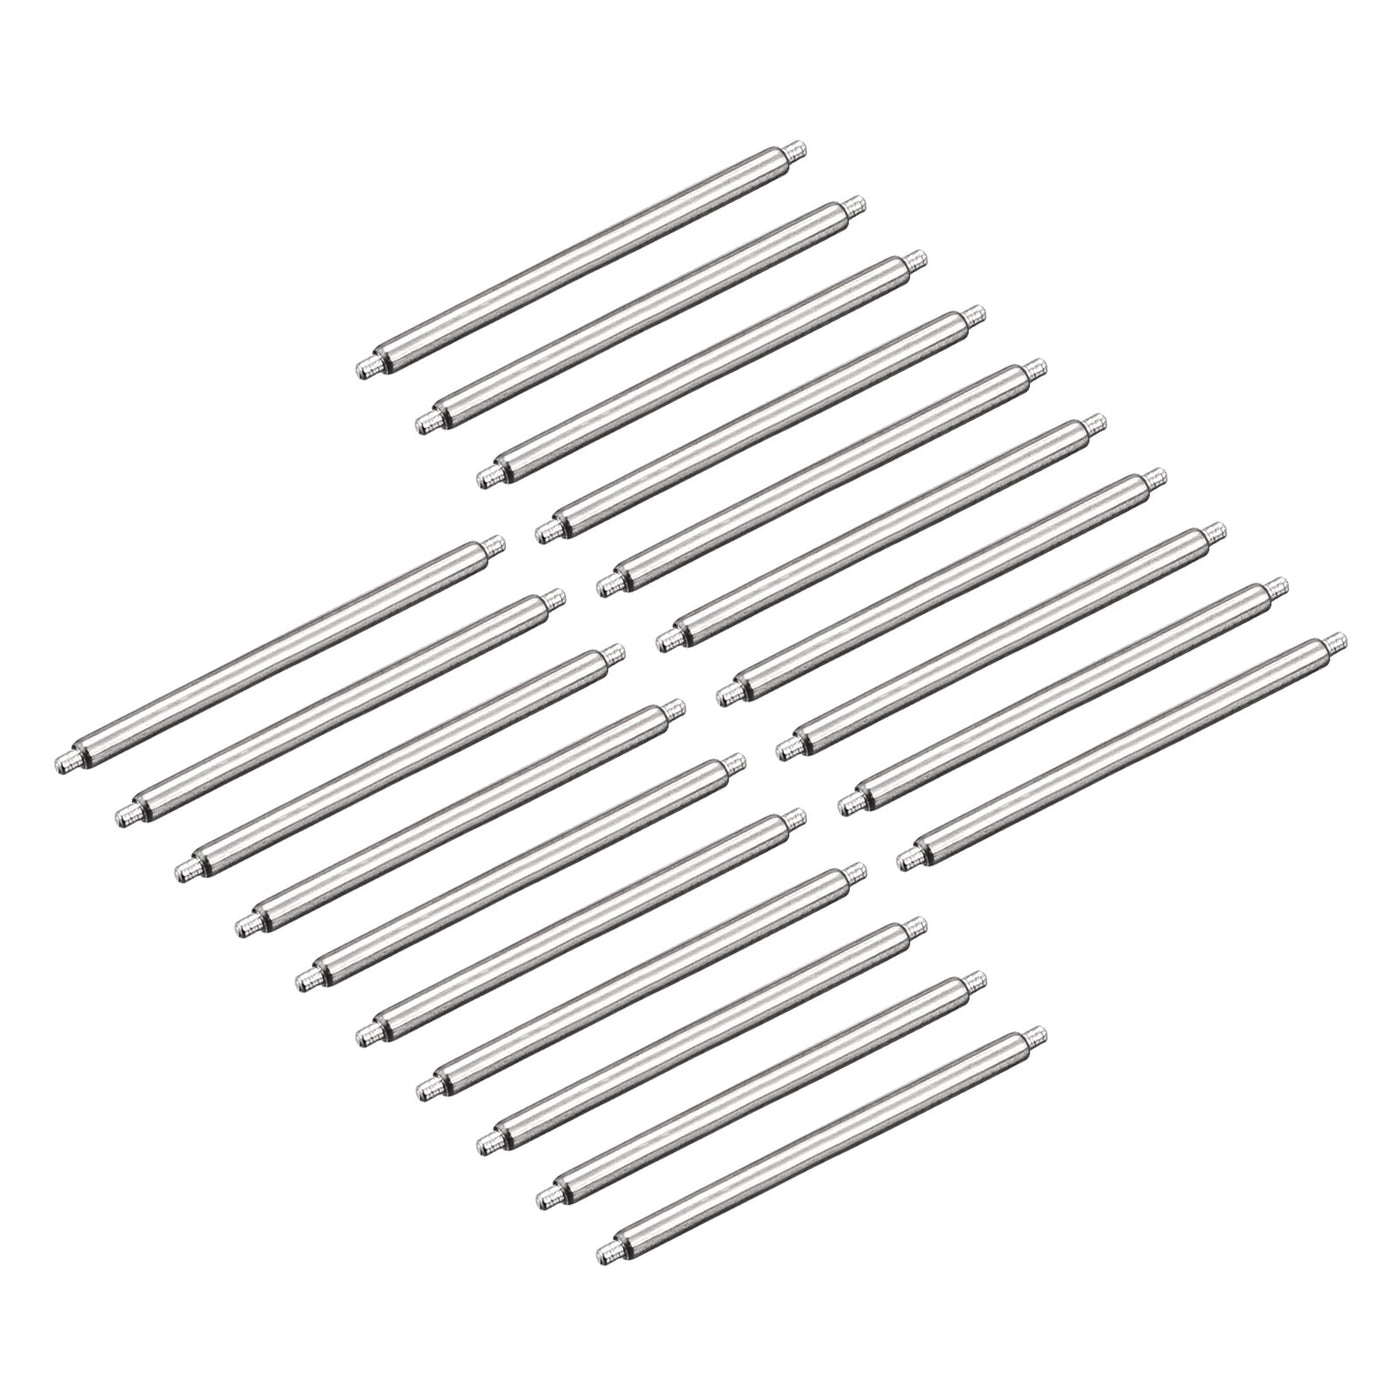 Uxcell Uxcell 20pcs Watch Band Pin 8mm Stainless Steel Spring Bar Pins 1.5mm Dia.